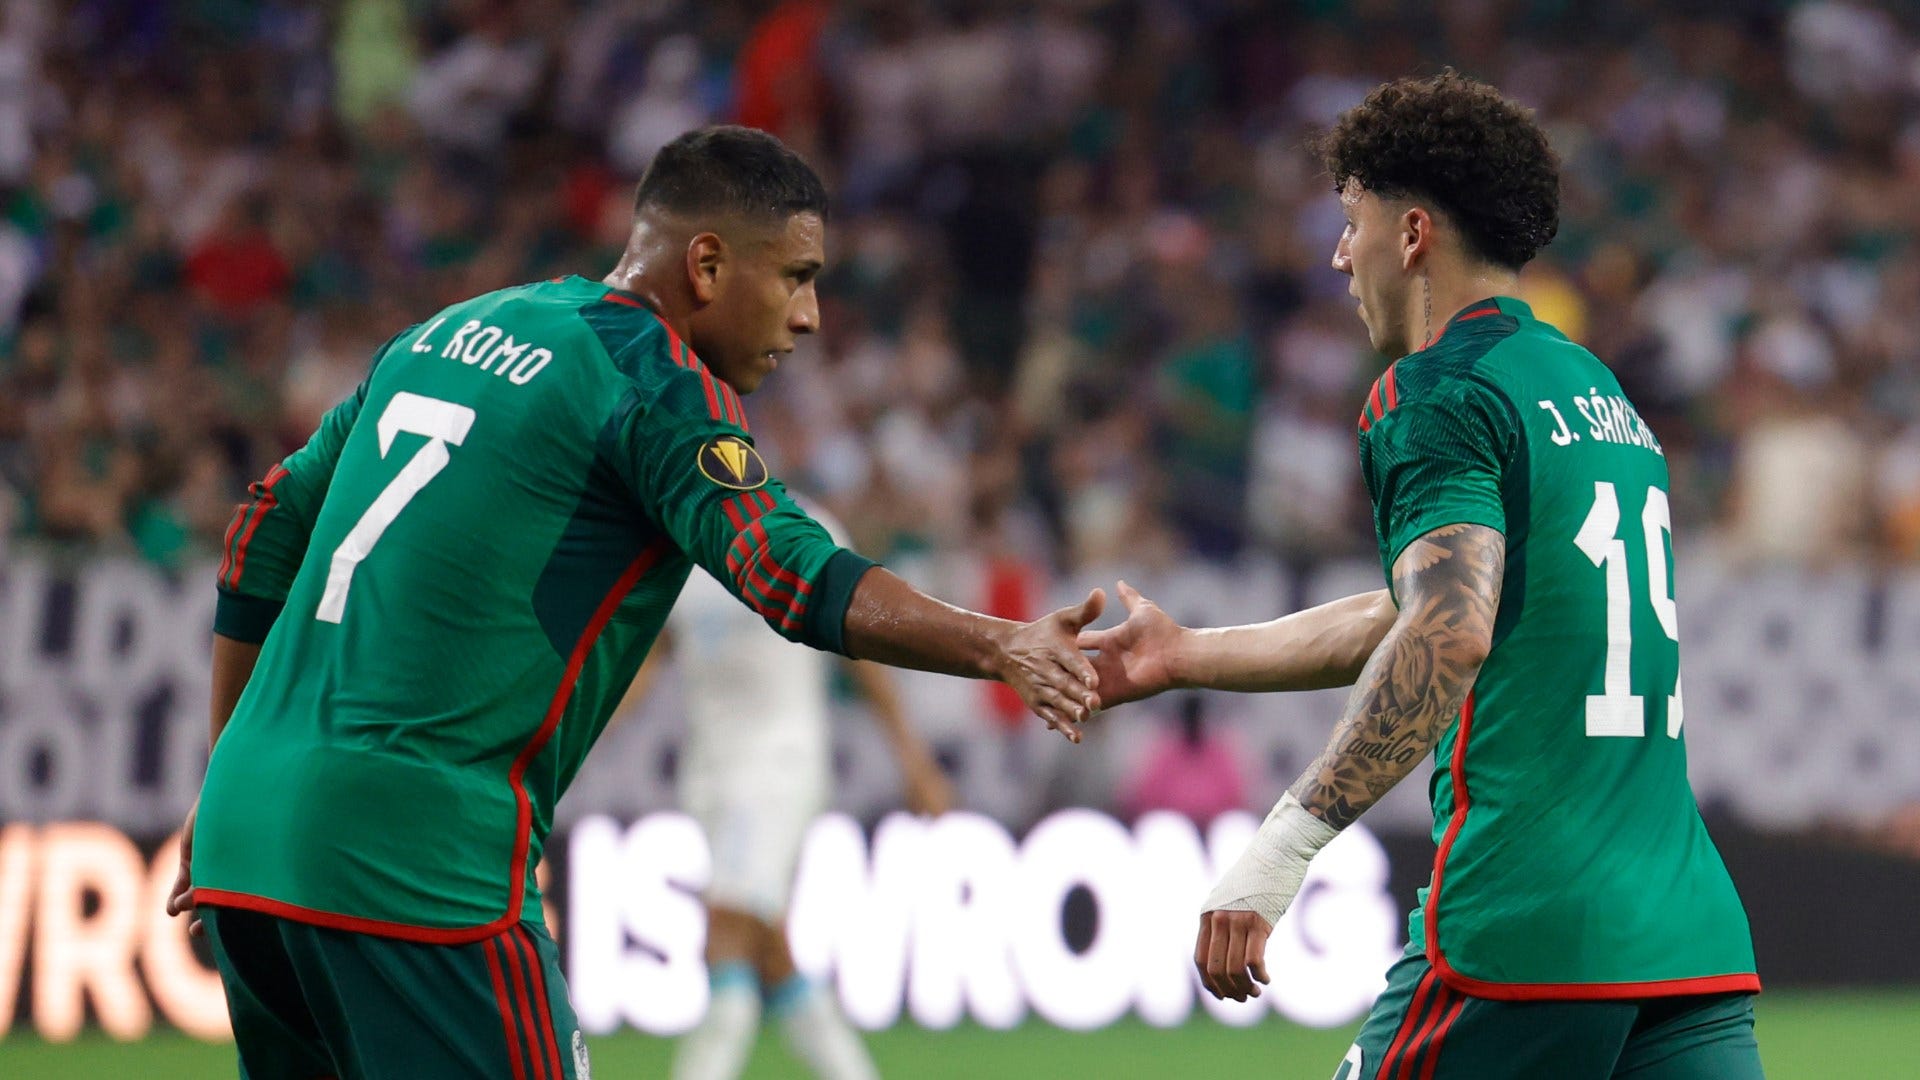 Haiti vs Mexico Where to watch the match online, live stream, TV channels, and kick-off time Goal US